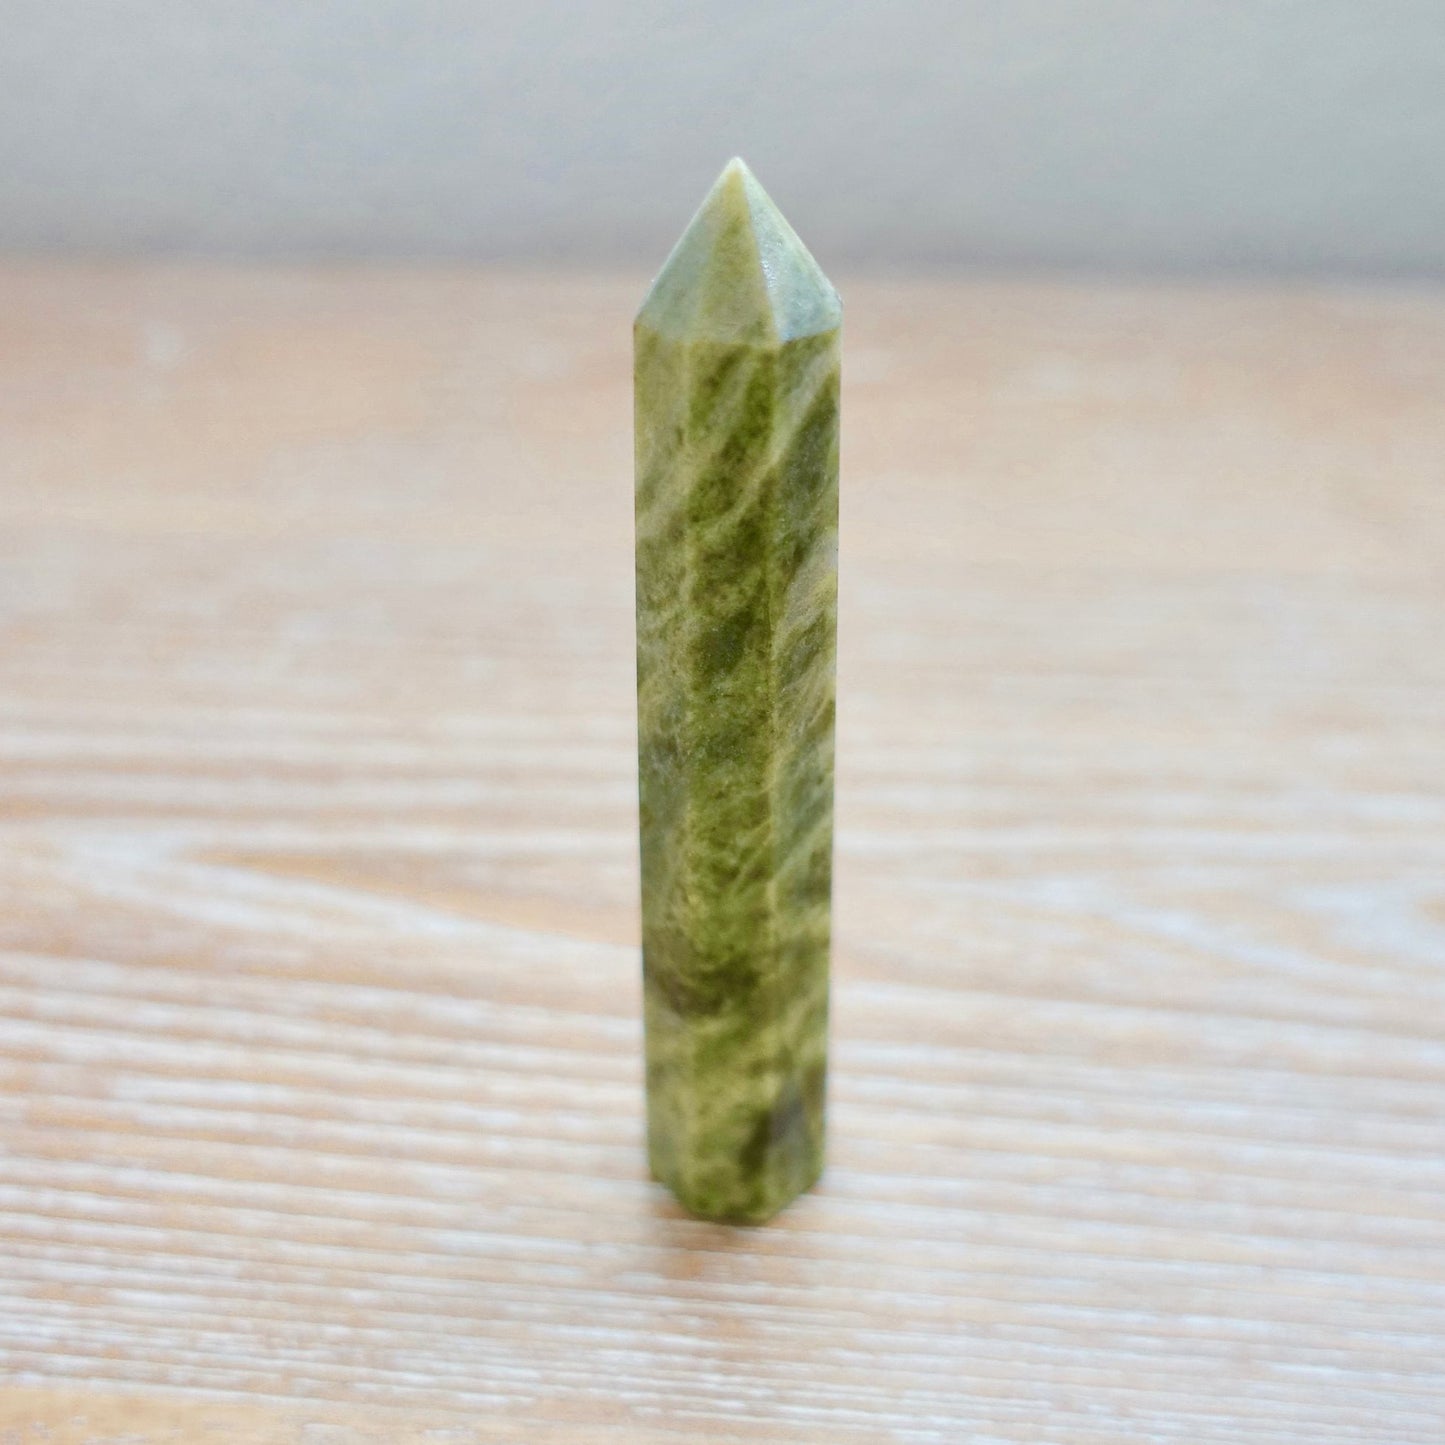 Looking for Vesuvianite Stone Obelisk, Vesuvianite Idocrase Tower? Shop at Magic Crystals for genuine Vesuvianite Single Pointers, Vesuvianite Wands and Towers. These Vesuvianite obelisks hold a power all their own as they symbolize the ancient obelisks found in Egypt. Shop at magiccrystals.com